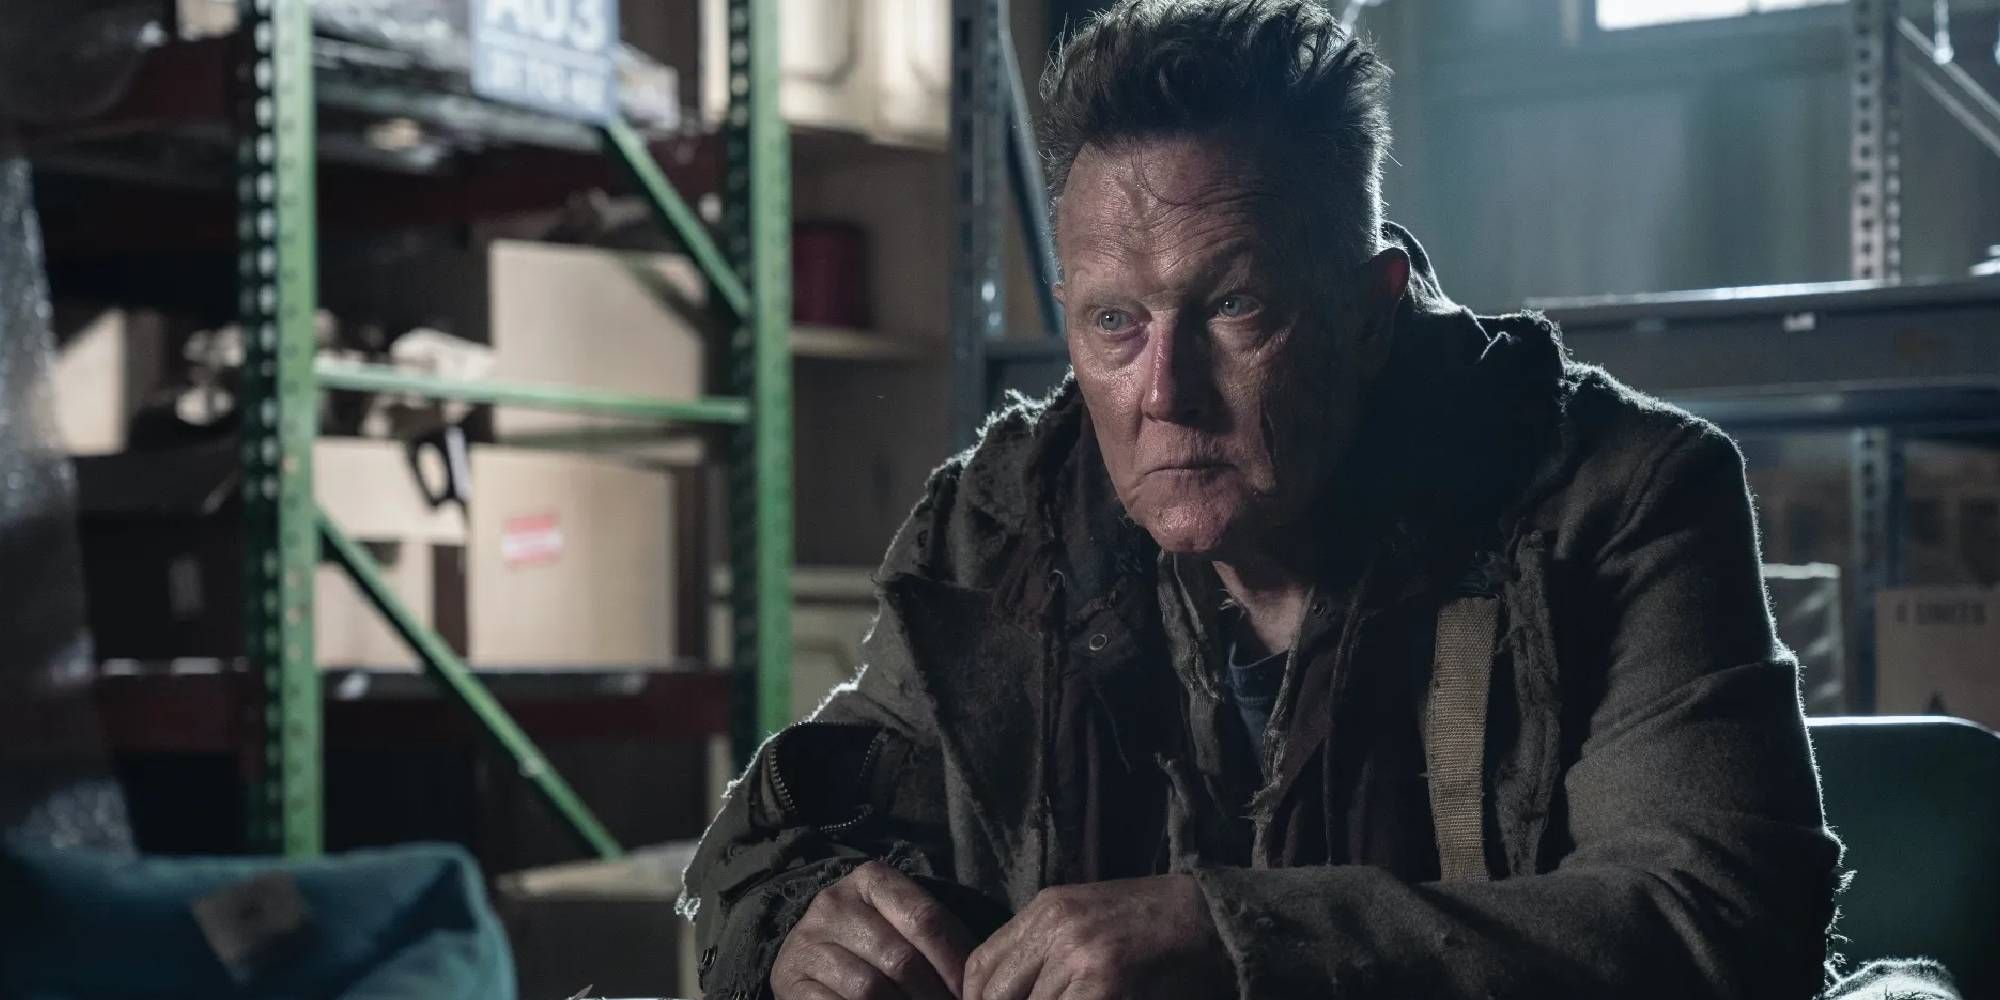 Robert Patrick in 'The Walking Dead' looking at someone off-camera.